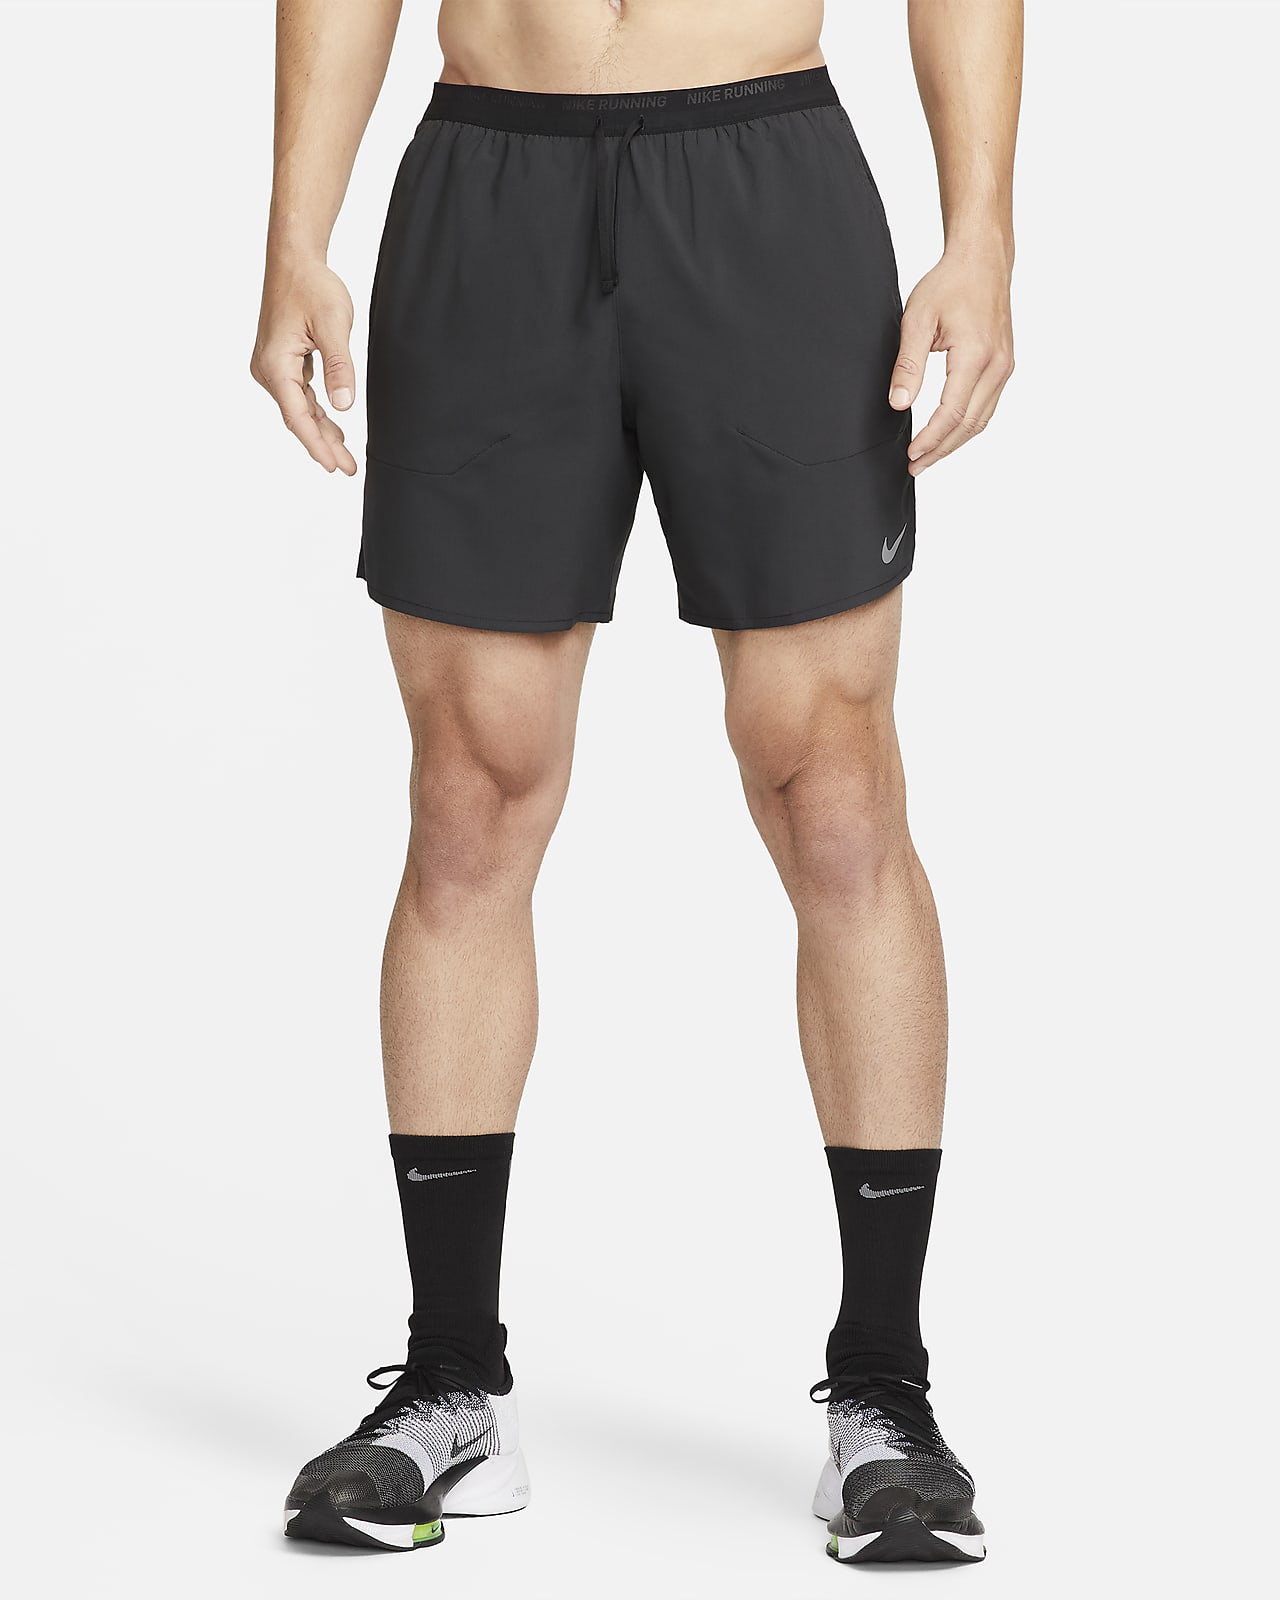 candidate Classify slit Nike Dri-FIT Stride Men's 18cm (approx.) Brief-Lined Running Shorts. Nike GB